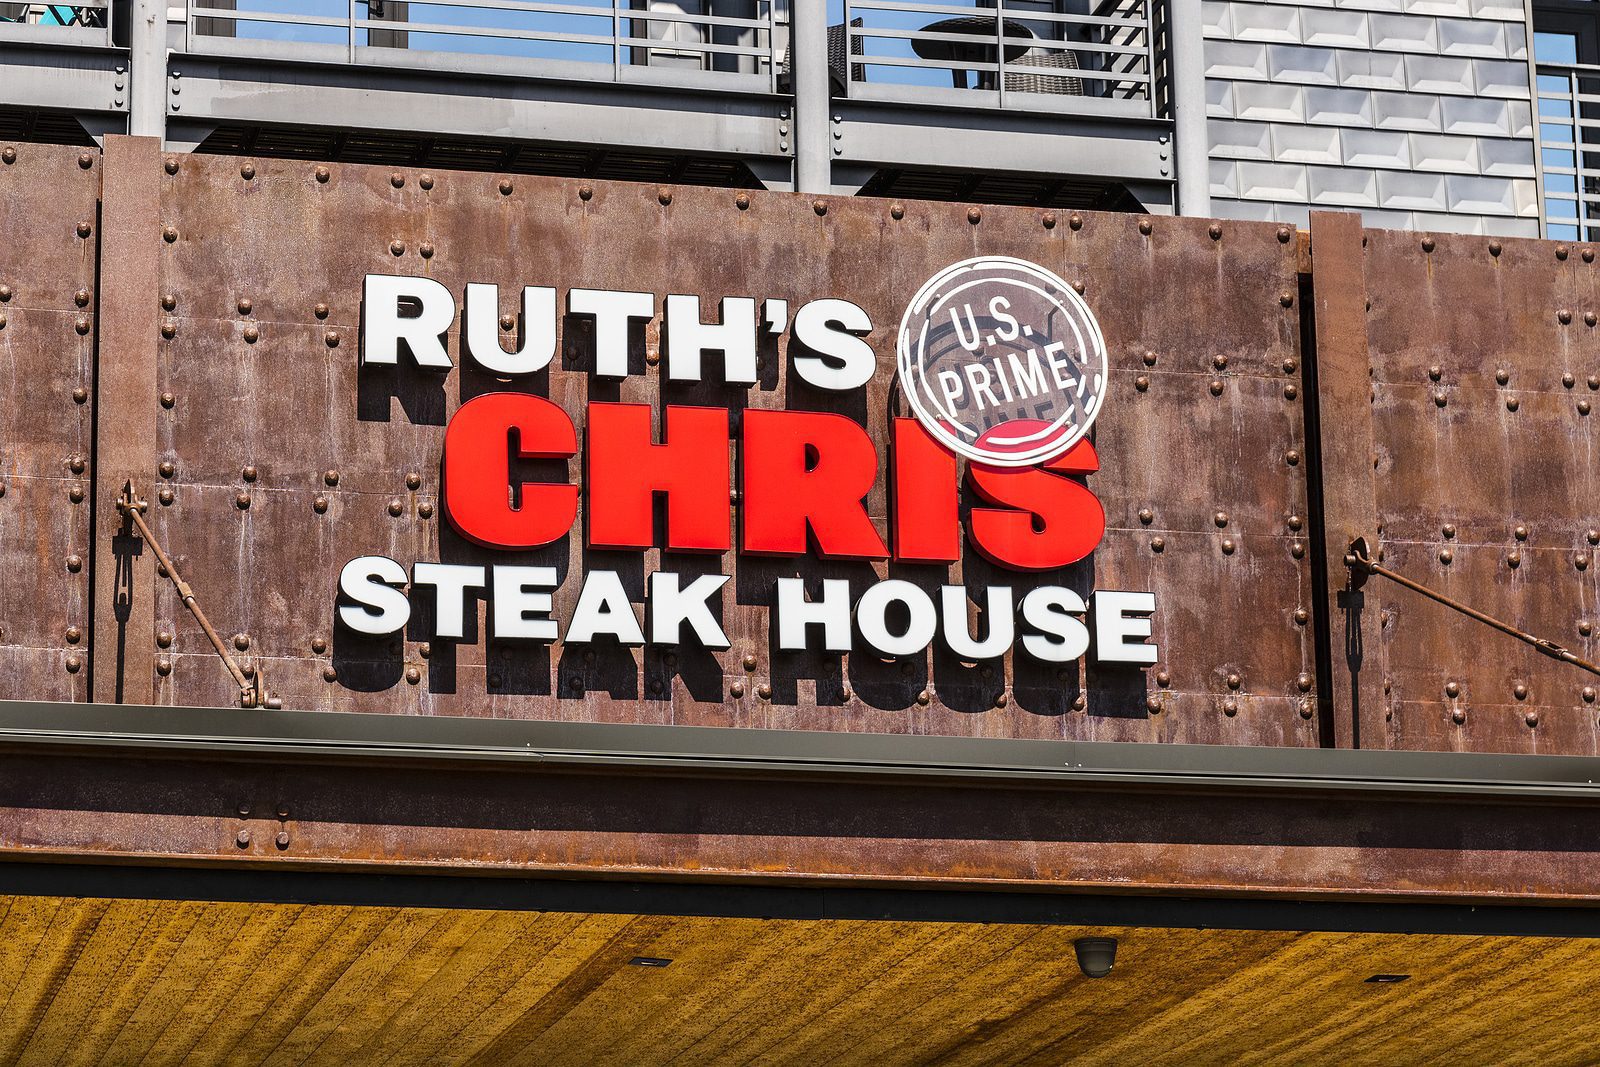 Ruth's Chris is purchased by Darden Restaurants